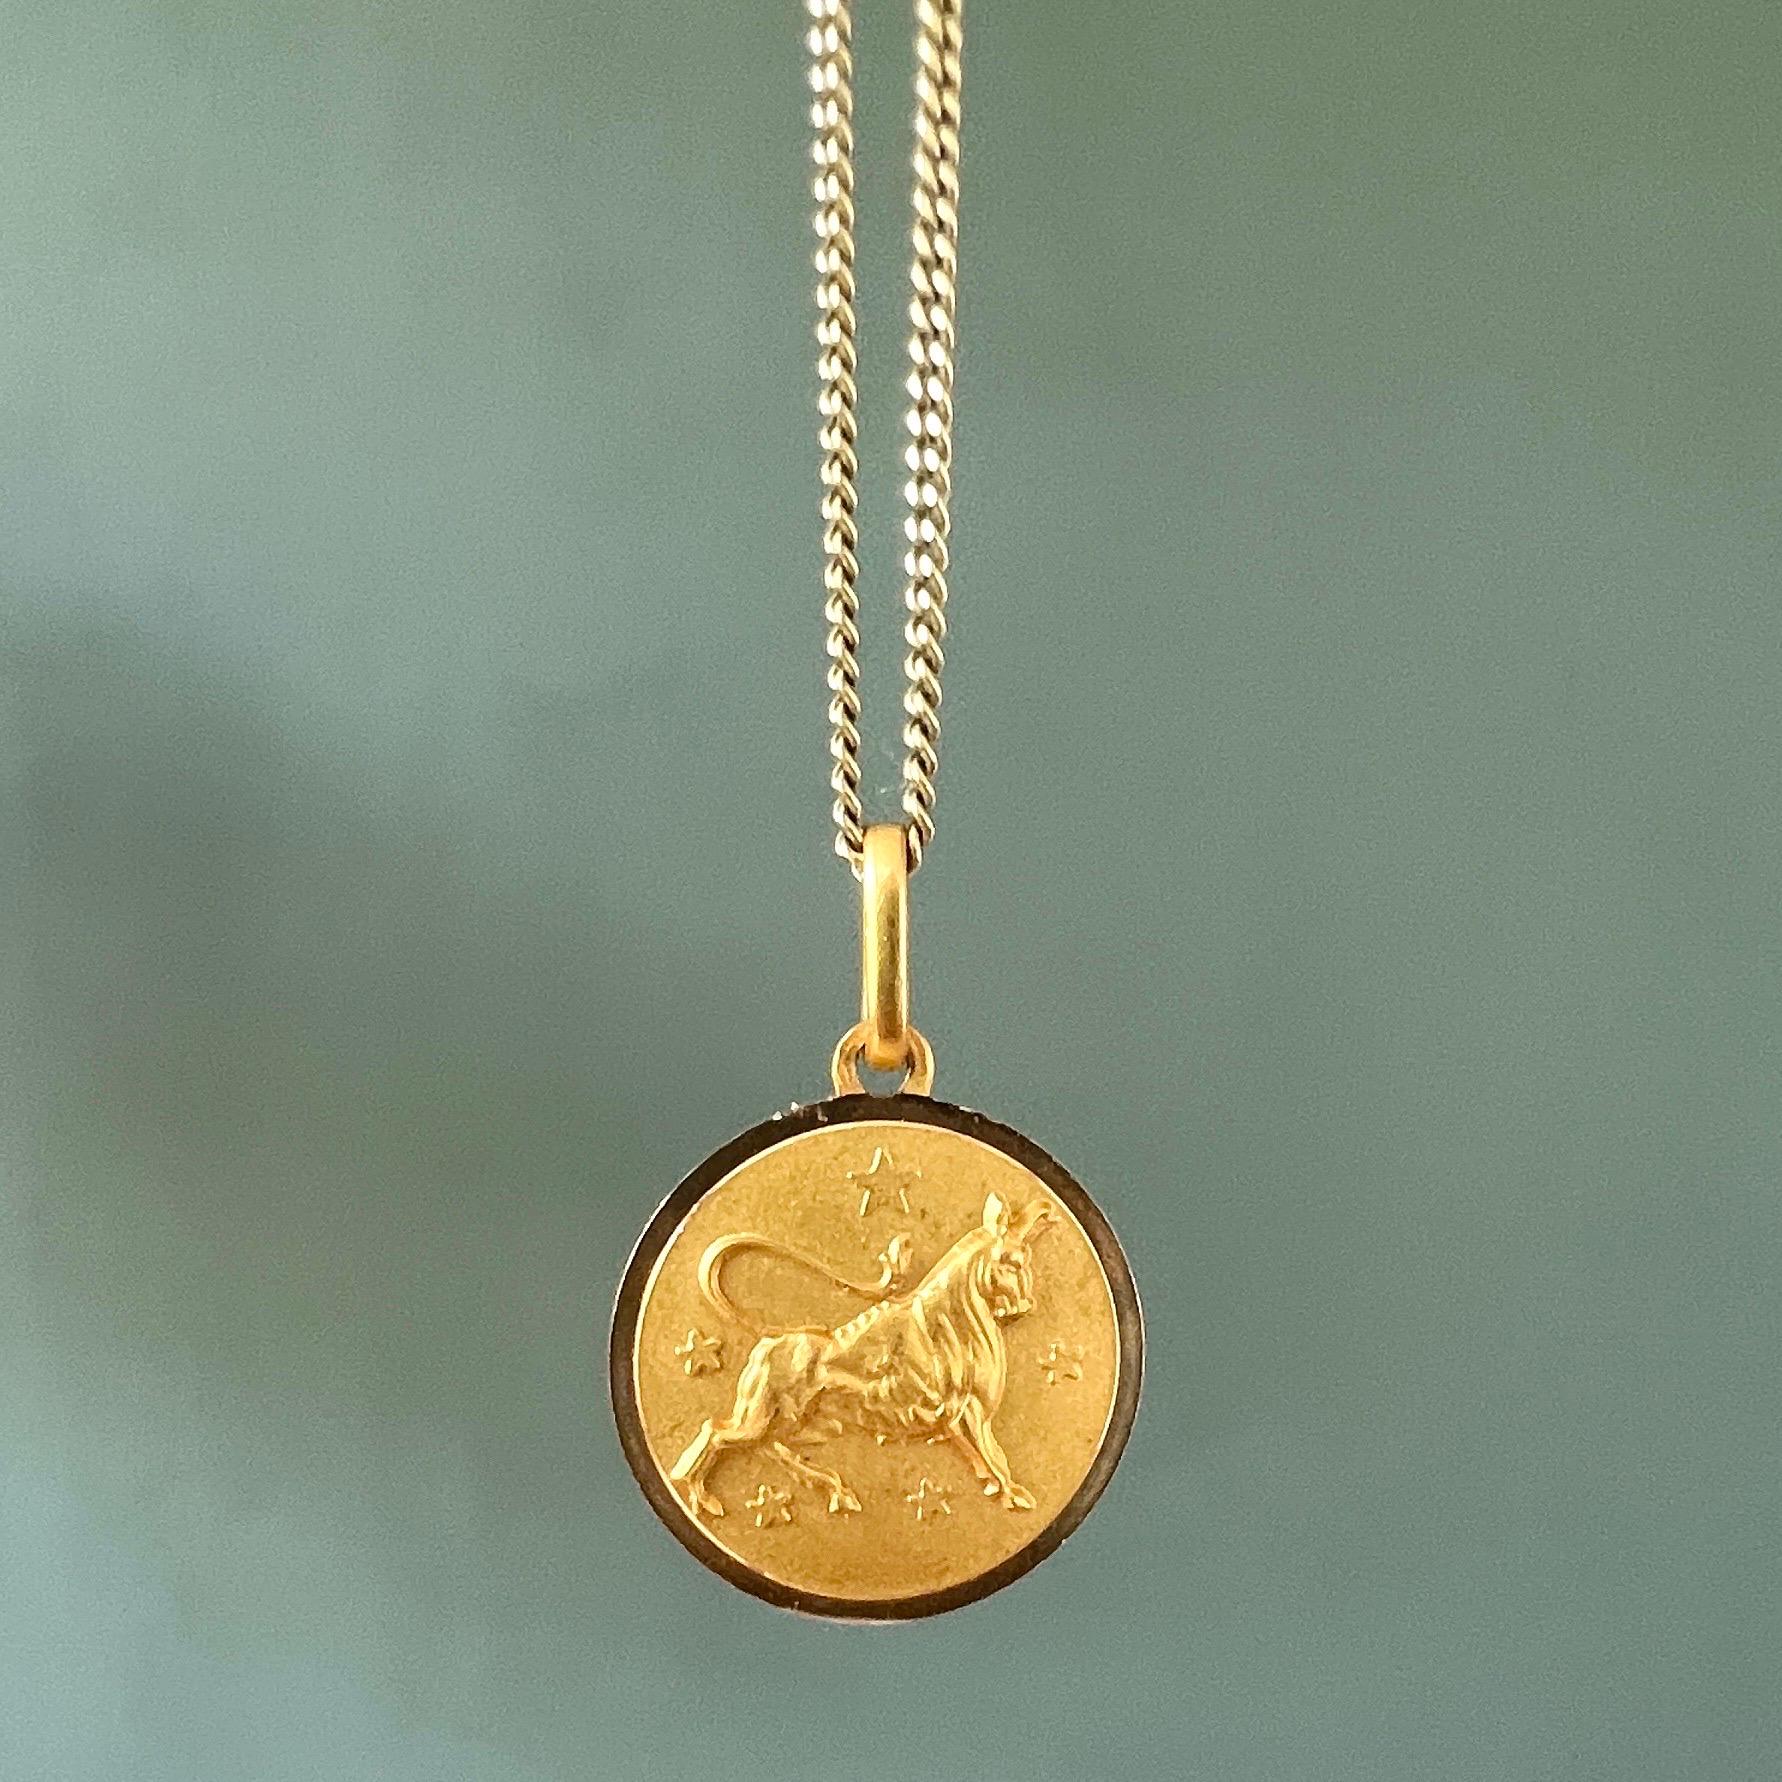 An 18 karat gold zodiac taurus charm pendant. The taurus or bull charm is beautifully designed in relief with stars and created in 18 karat gold. 

Charms are great to collect as wearable memories, it has a symbolic and often a sentimental value.